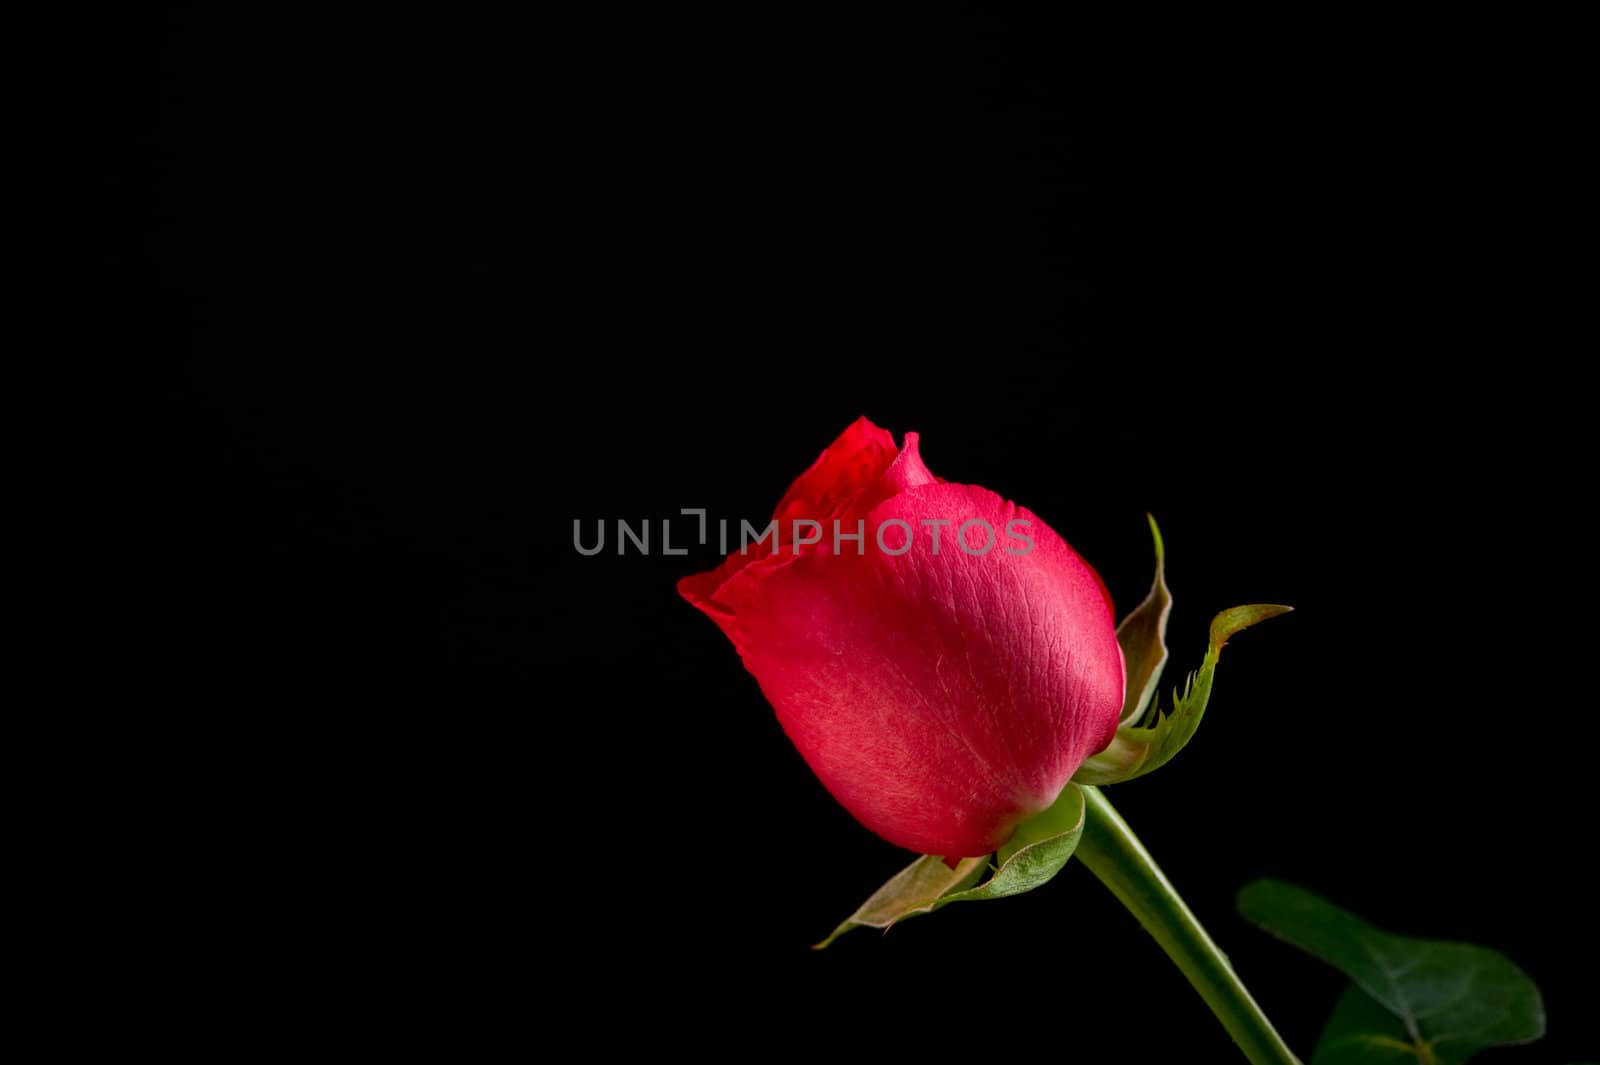 Single Red Rose on Black Background by gregory21